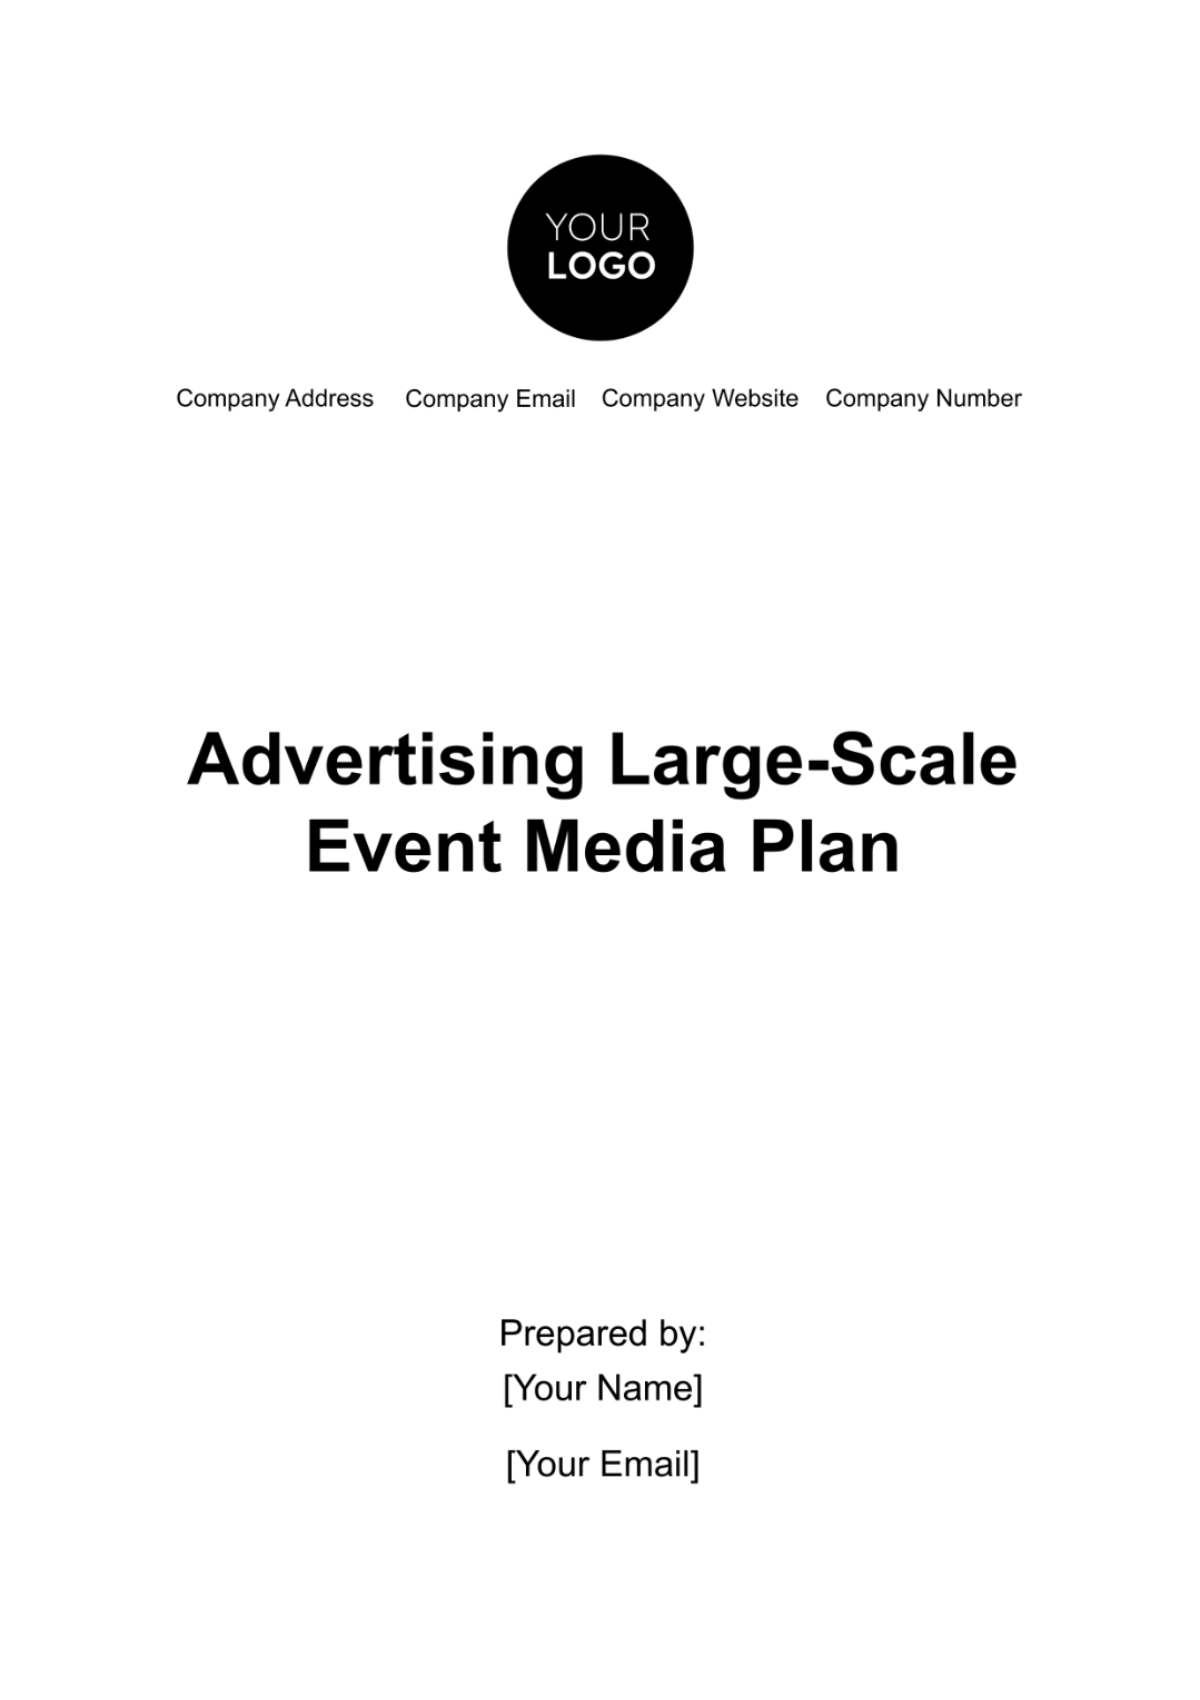 Free Advertising Large-Scale Event Media Plan Template